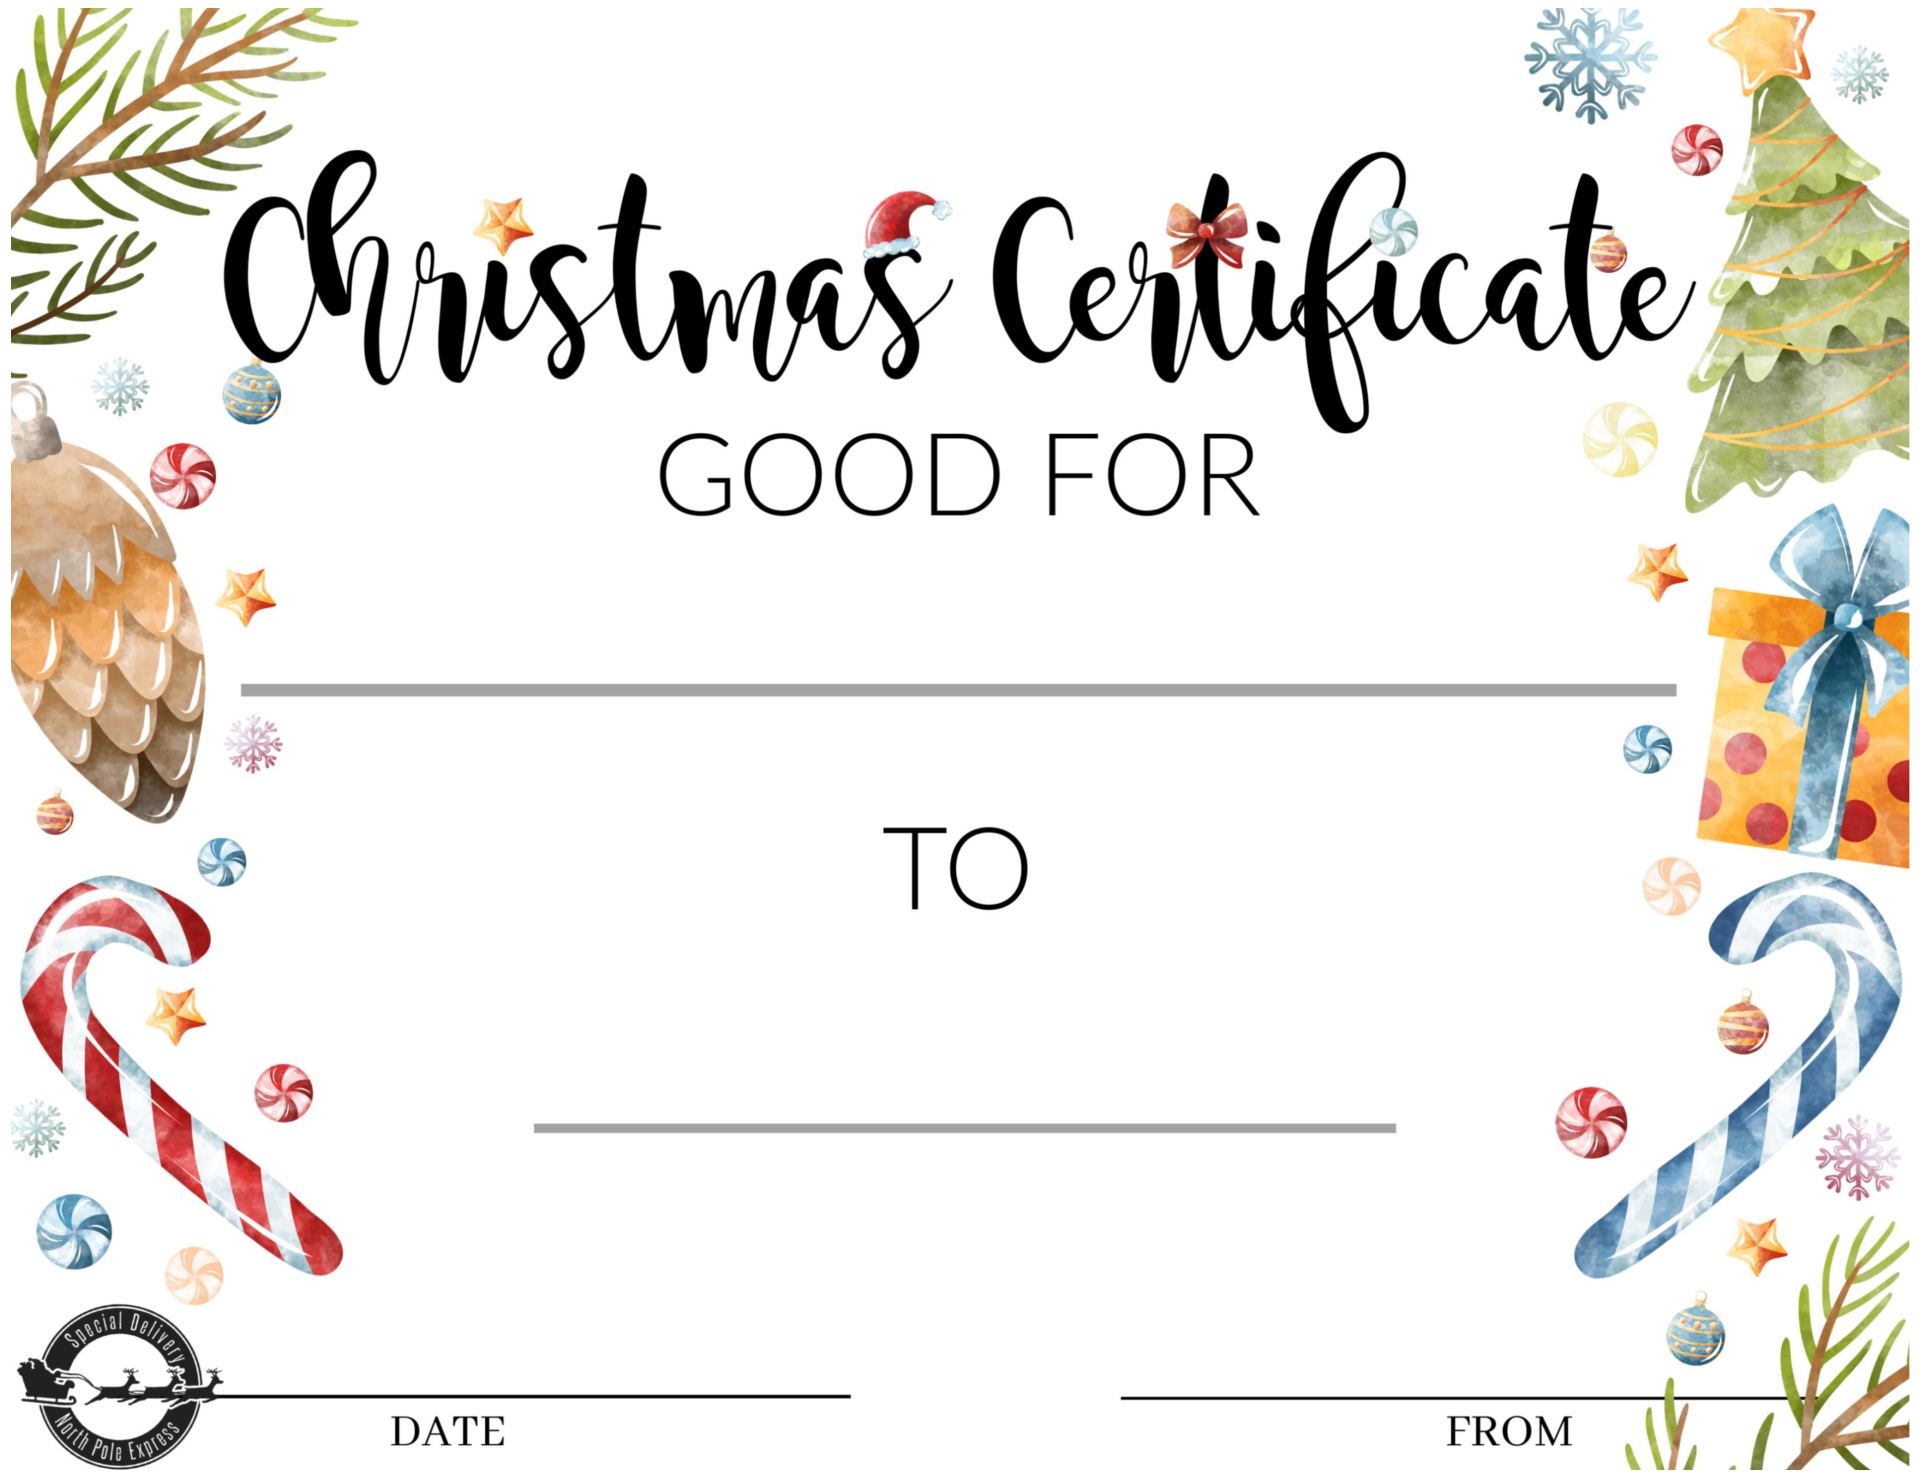 printable-gift-certificate-forms-printable-forms-free-online